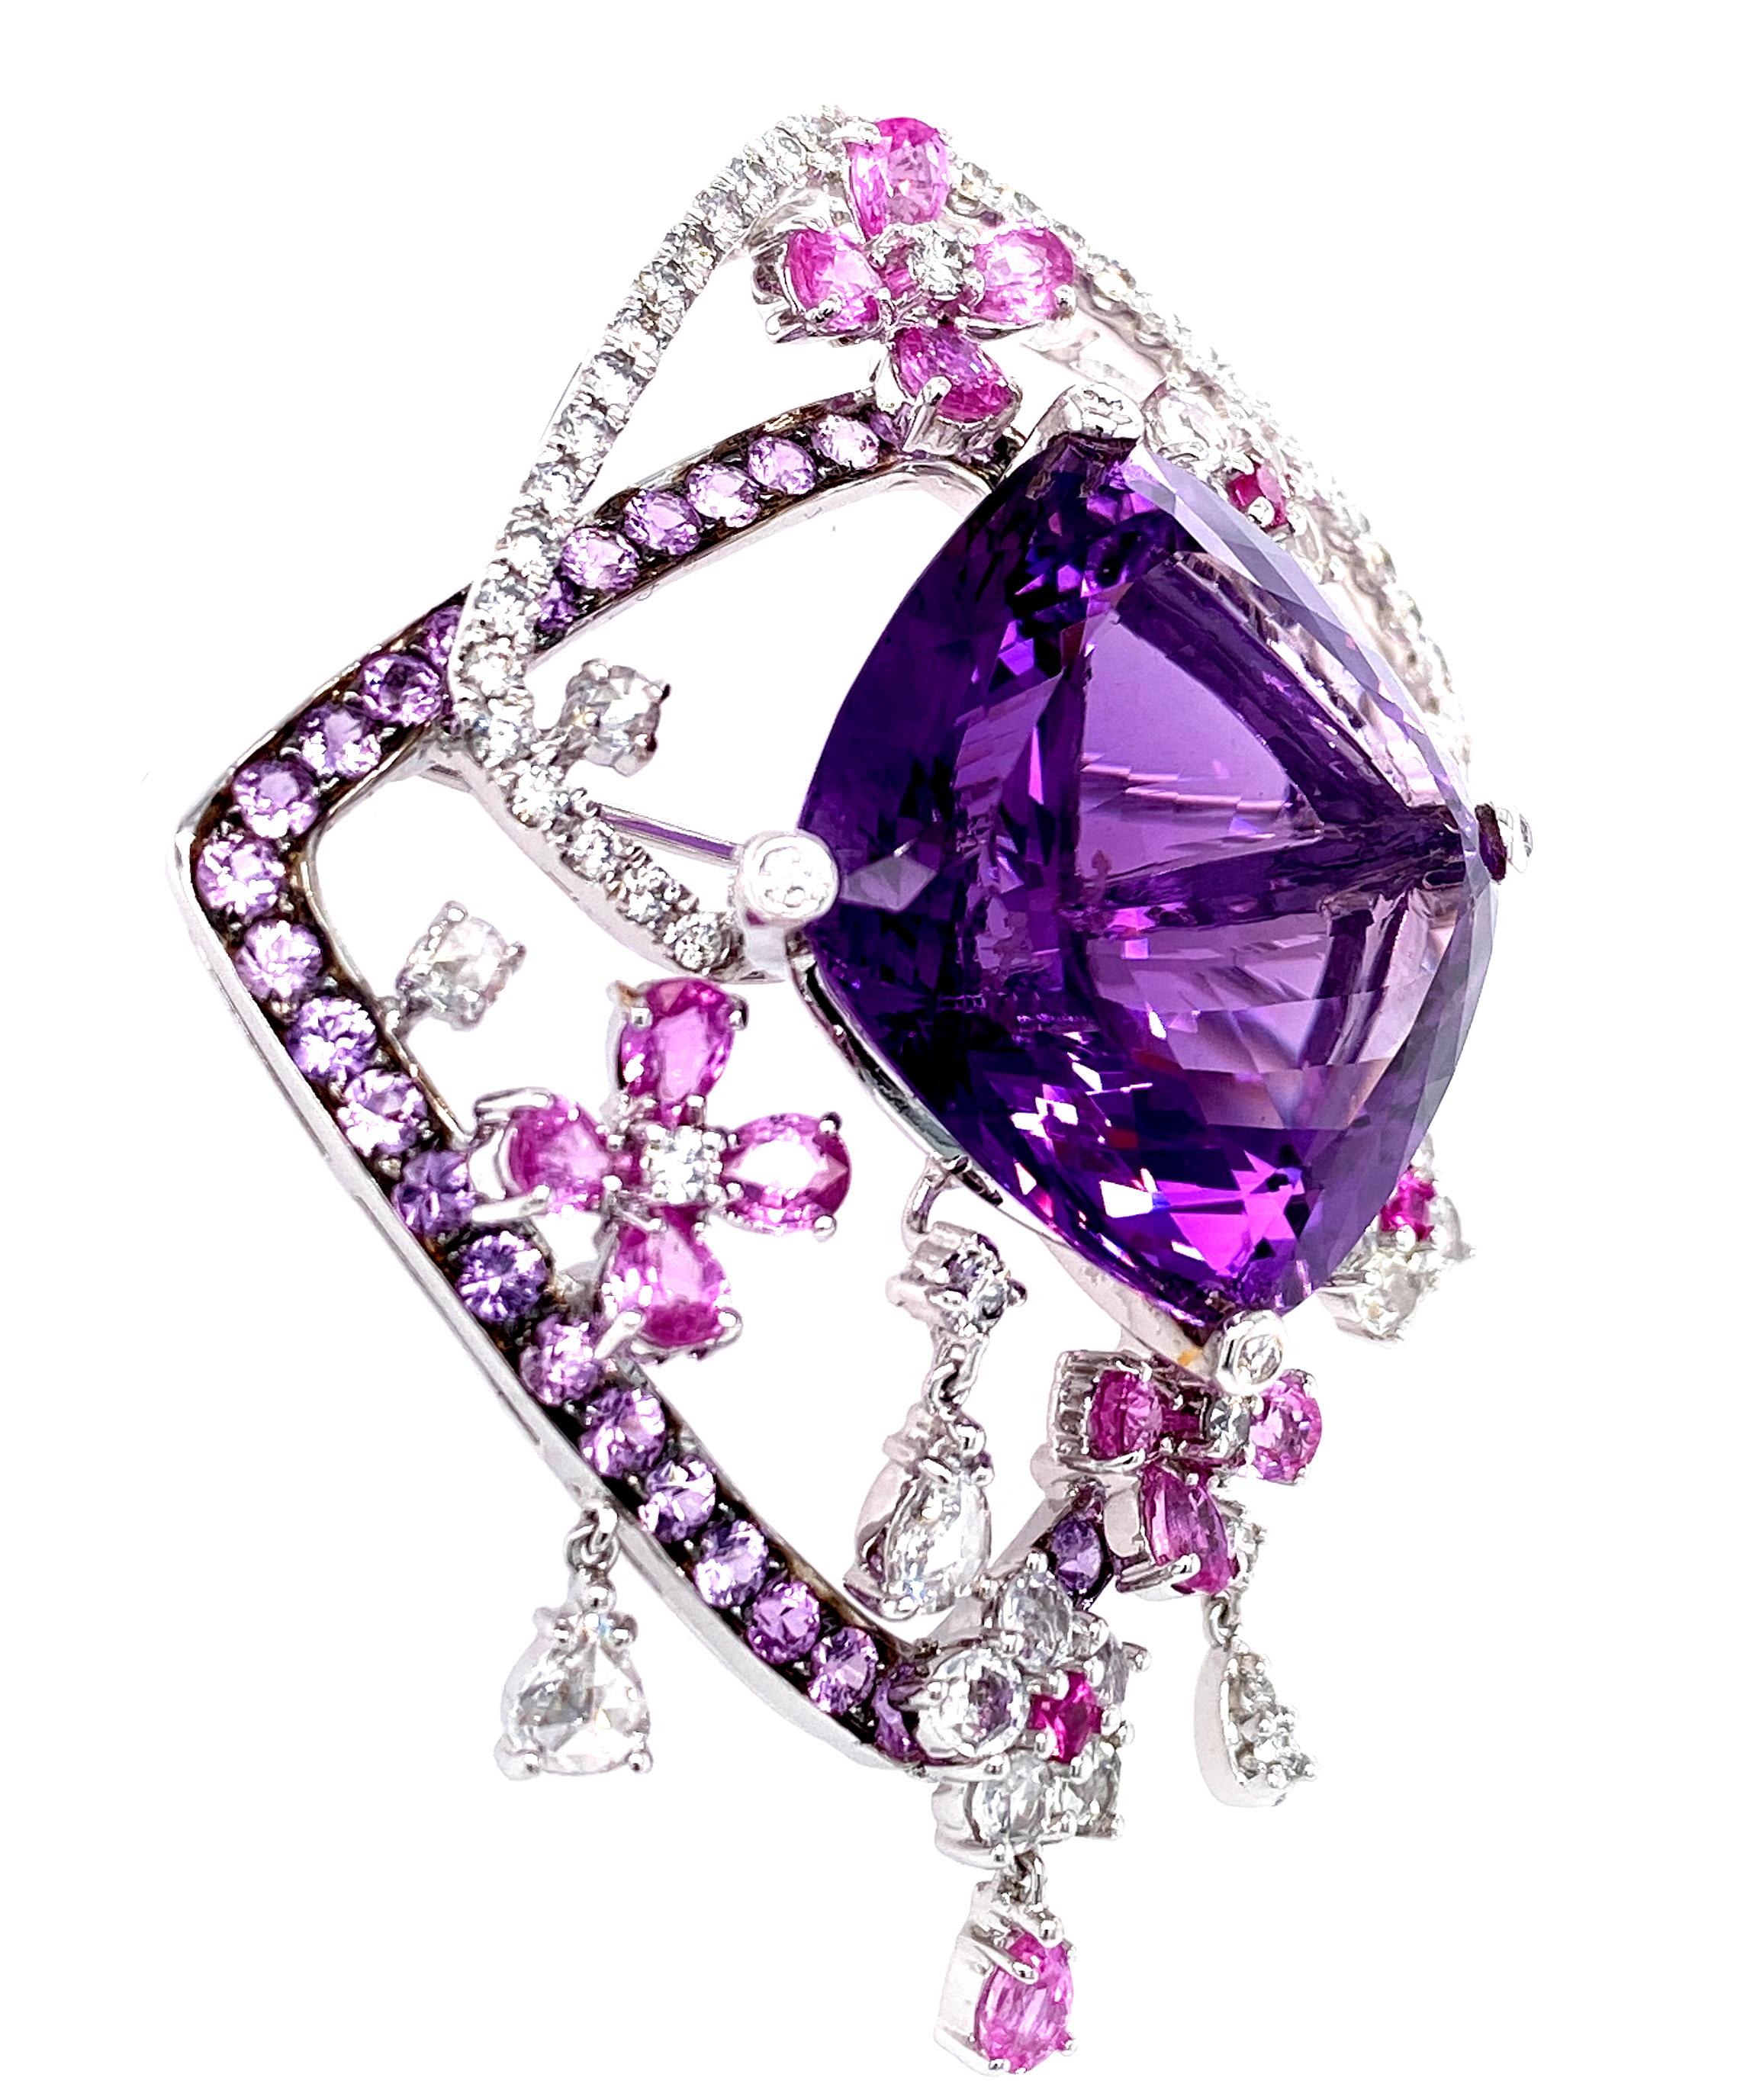 Floral Motif Amethyst and Diamond Brooch in 18 Karat White Gold 1